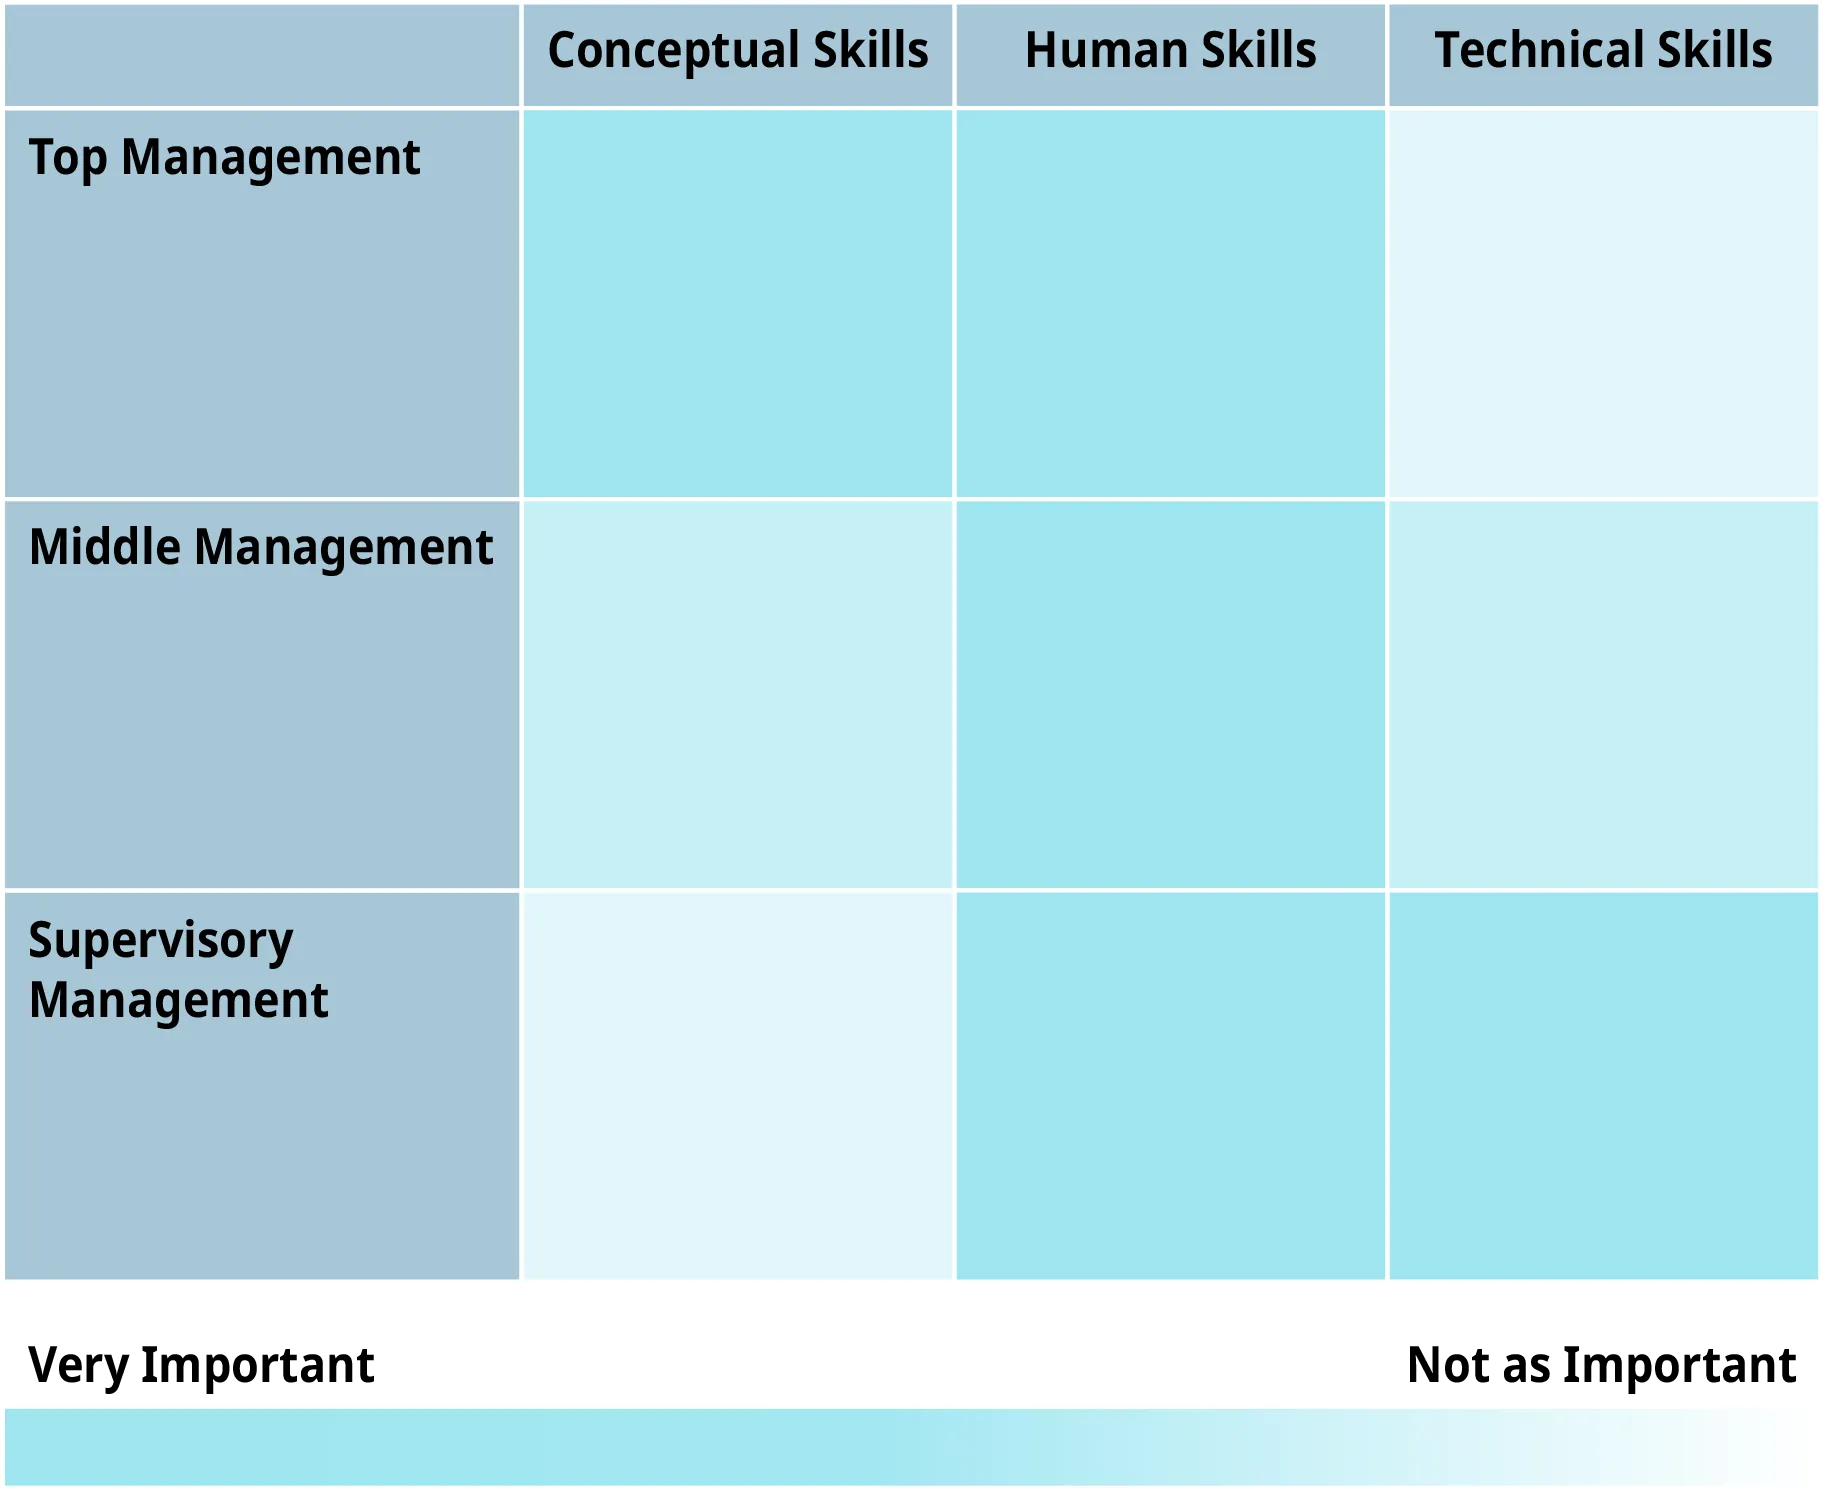 From left to right, the first column is conceptual skills. The second column is human skills. The third column is technical skills. From top to bottom, the first row is top management. The second row is middle management. The bottom row is supervisory management. At the bottom of the table, at the left hand side, is labeled as very important. On the bottom of the right side of the table is labeled as not as important.